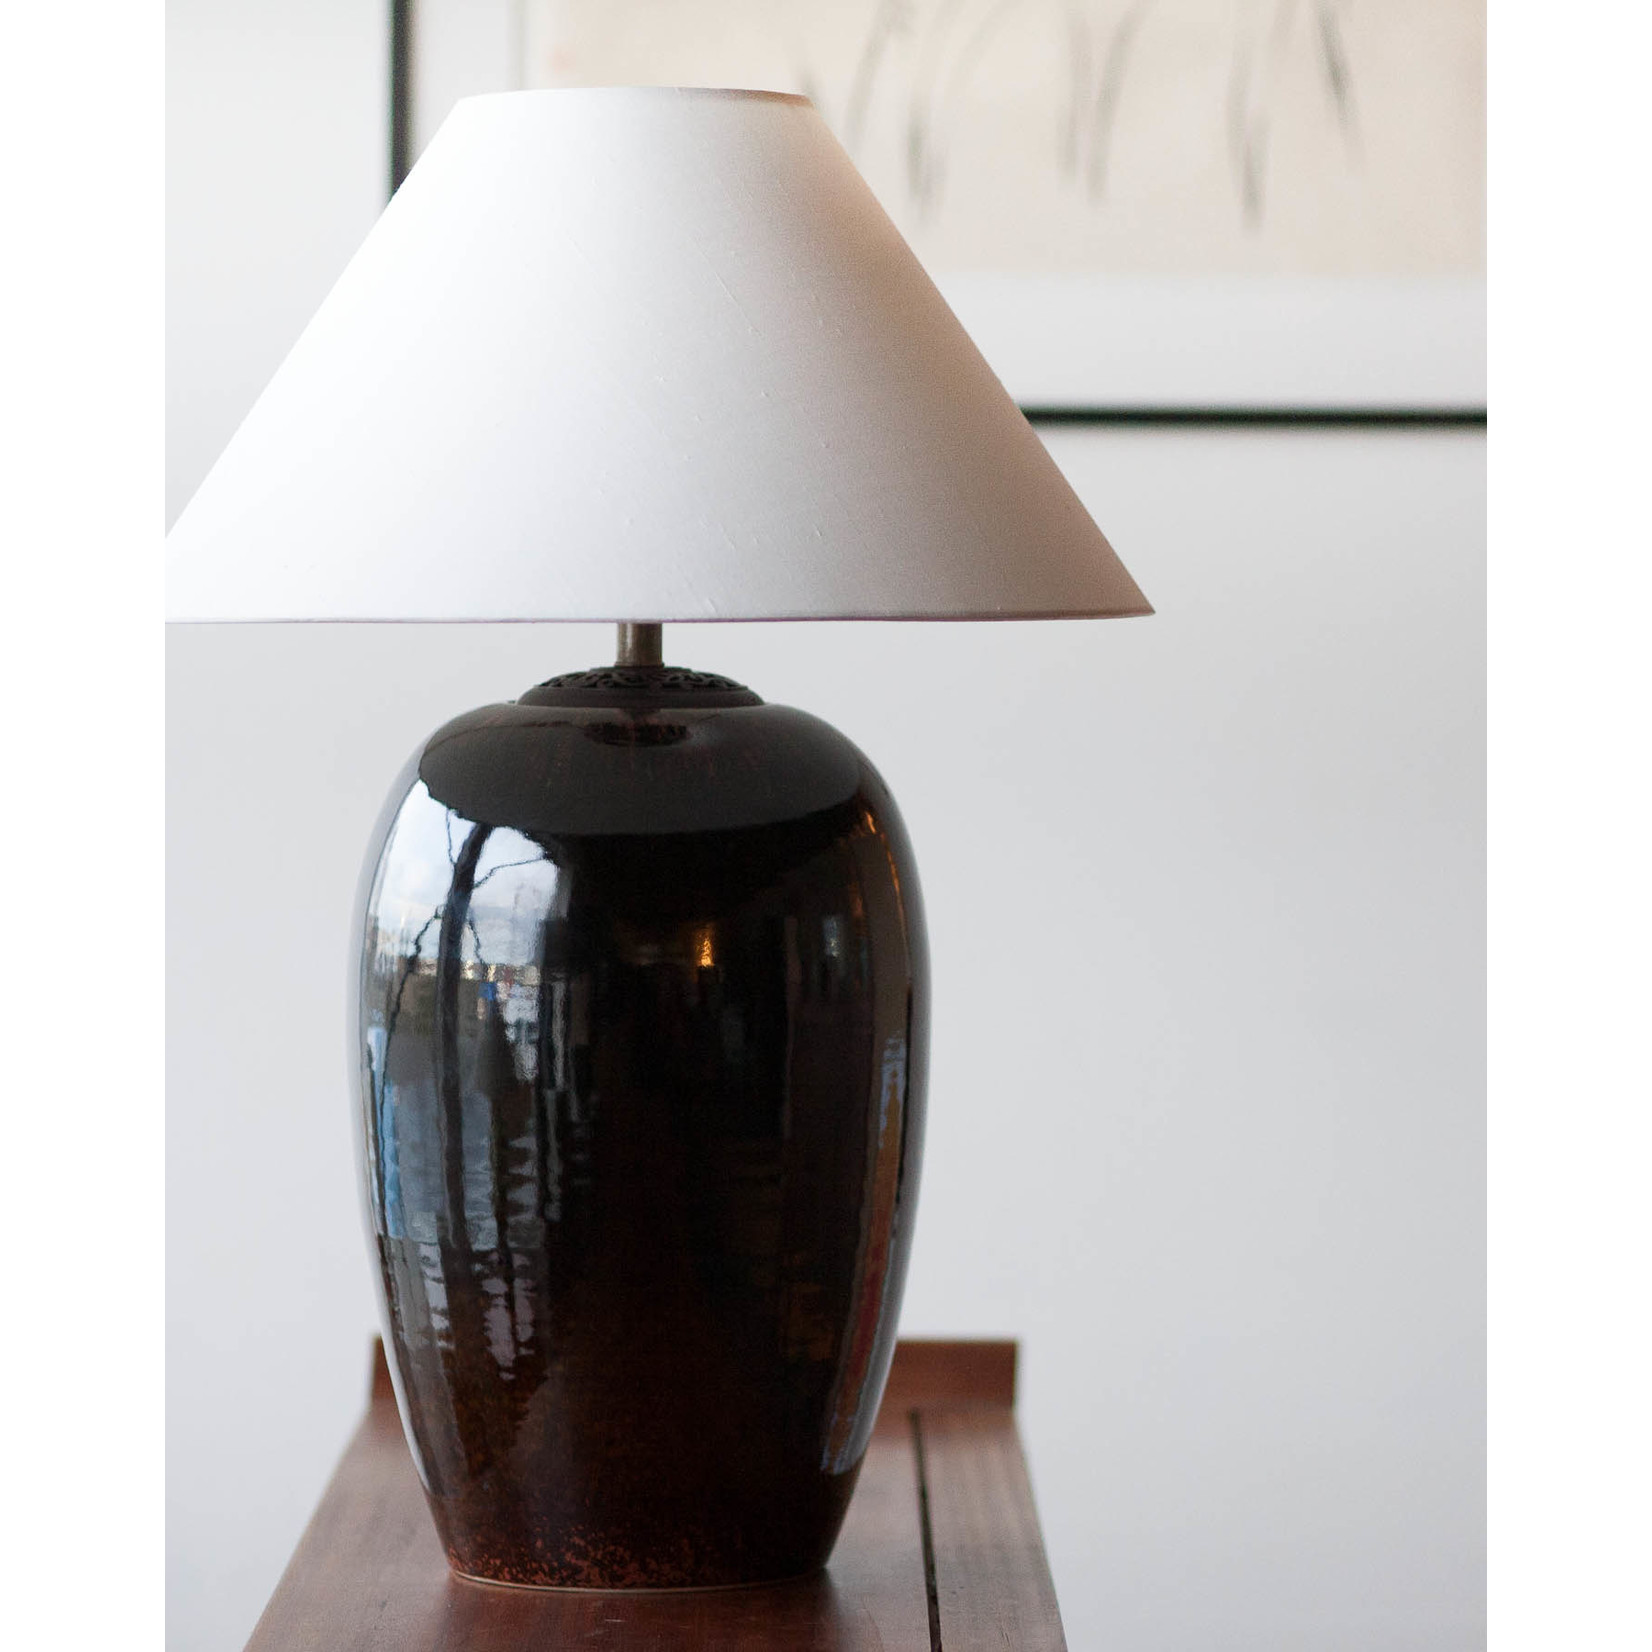 Lawrence & Scott Legacy Melanie Porcelain Lamp in Flashed Tobacco Brown (NYC Sample)